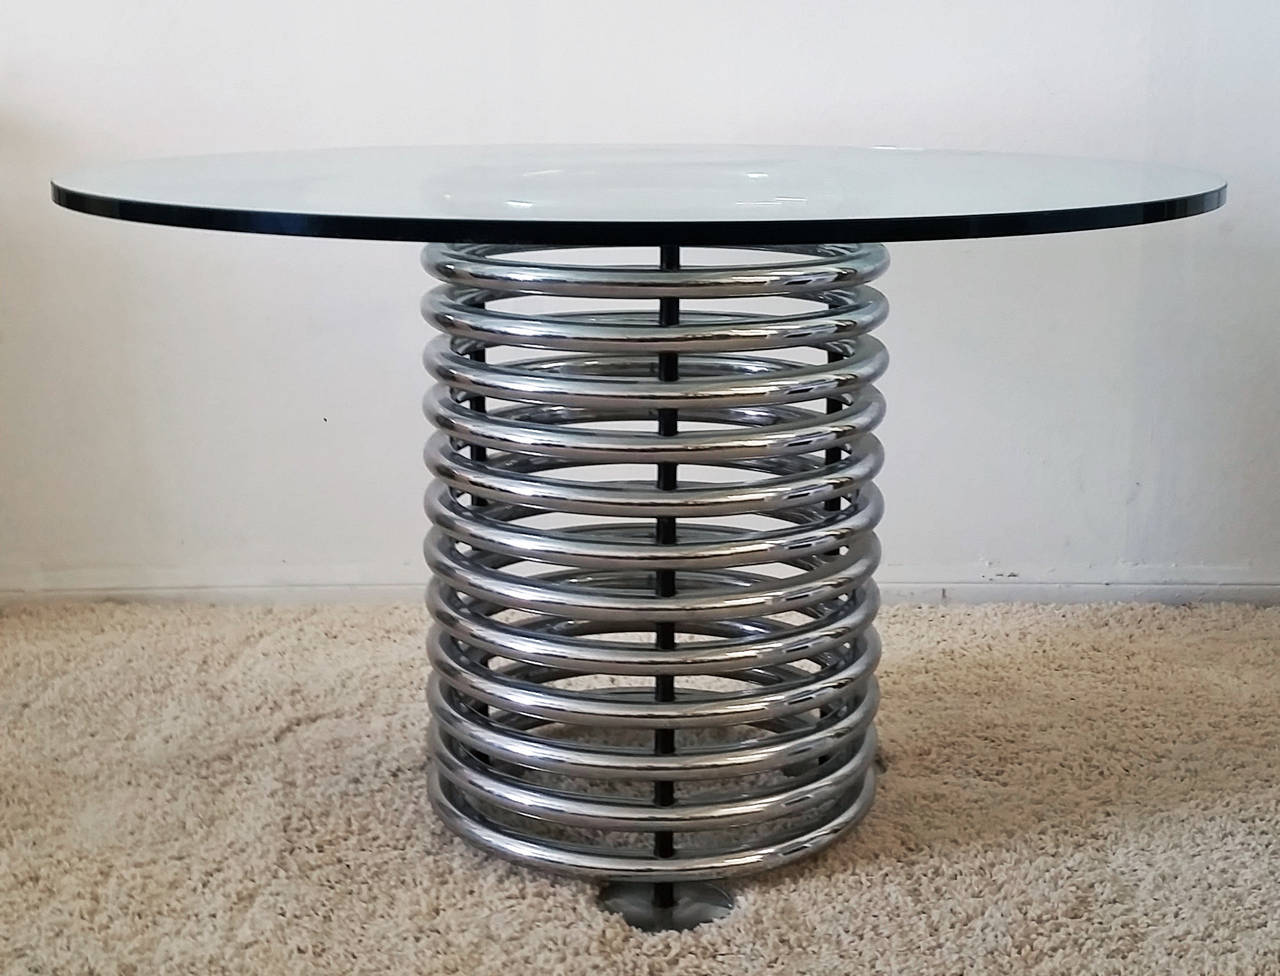 A gorgeous Italian Modern chrome and glass dining table. The table is in incredible condition with no pitting or rust-- very minimal wear to commensurate with age.

Photographed with set of 4 Thema dining chairs, also offered for sale separately.